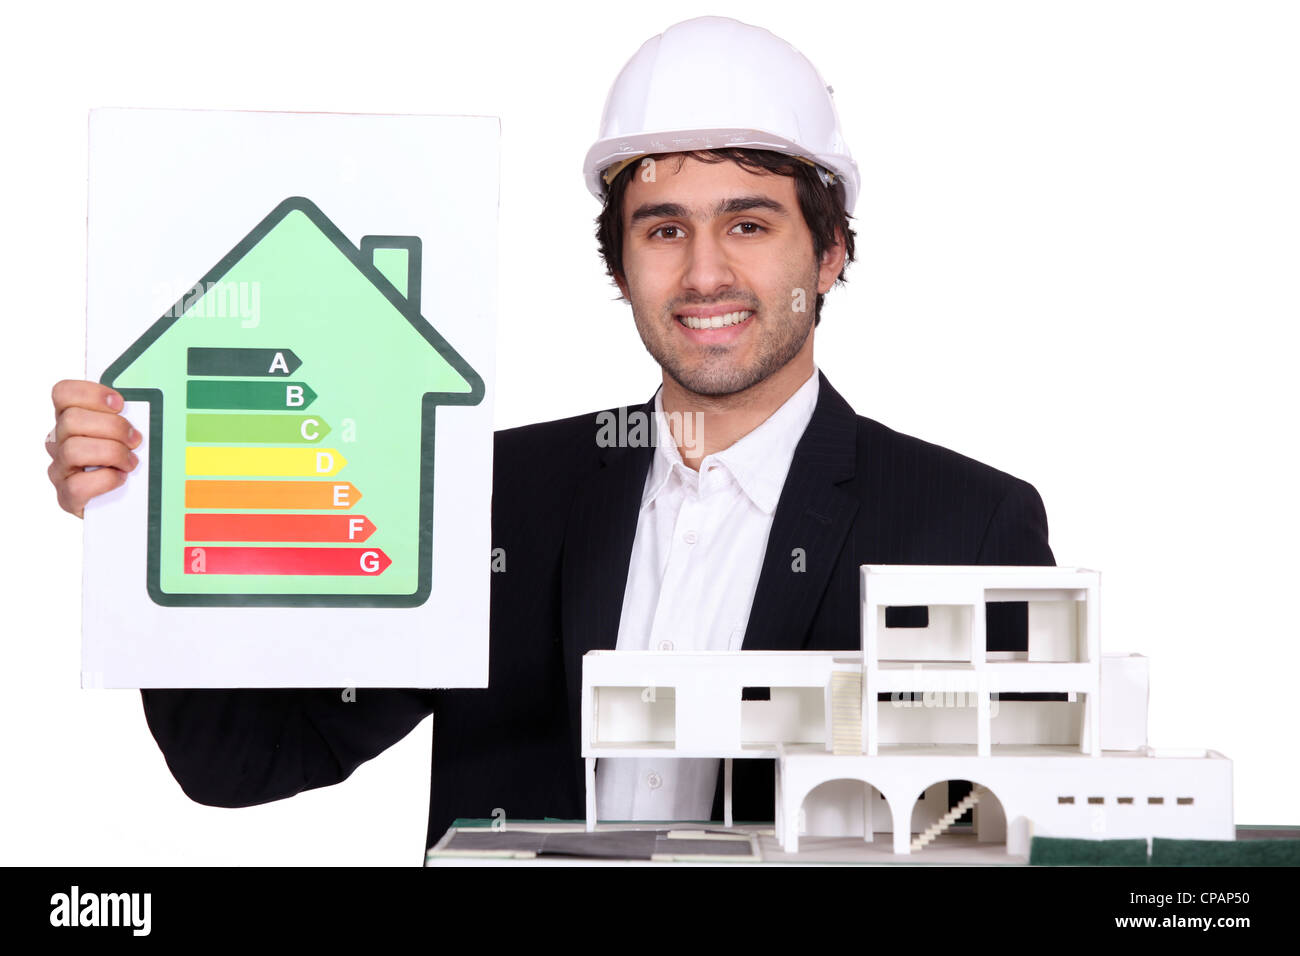 Architect holding model house and energy rating poster Stock Photo